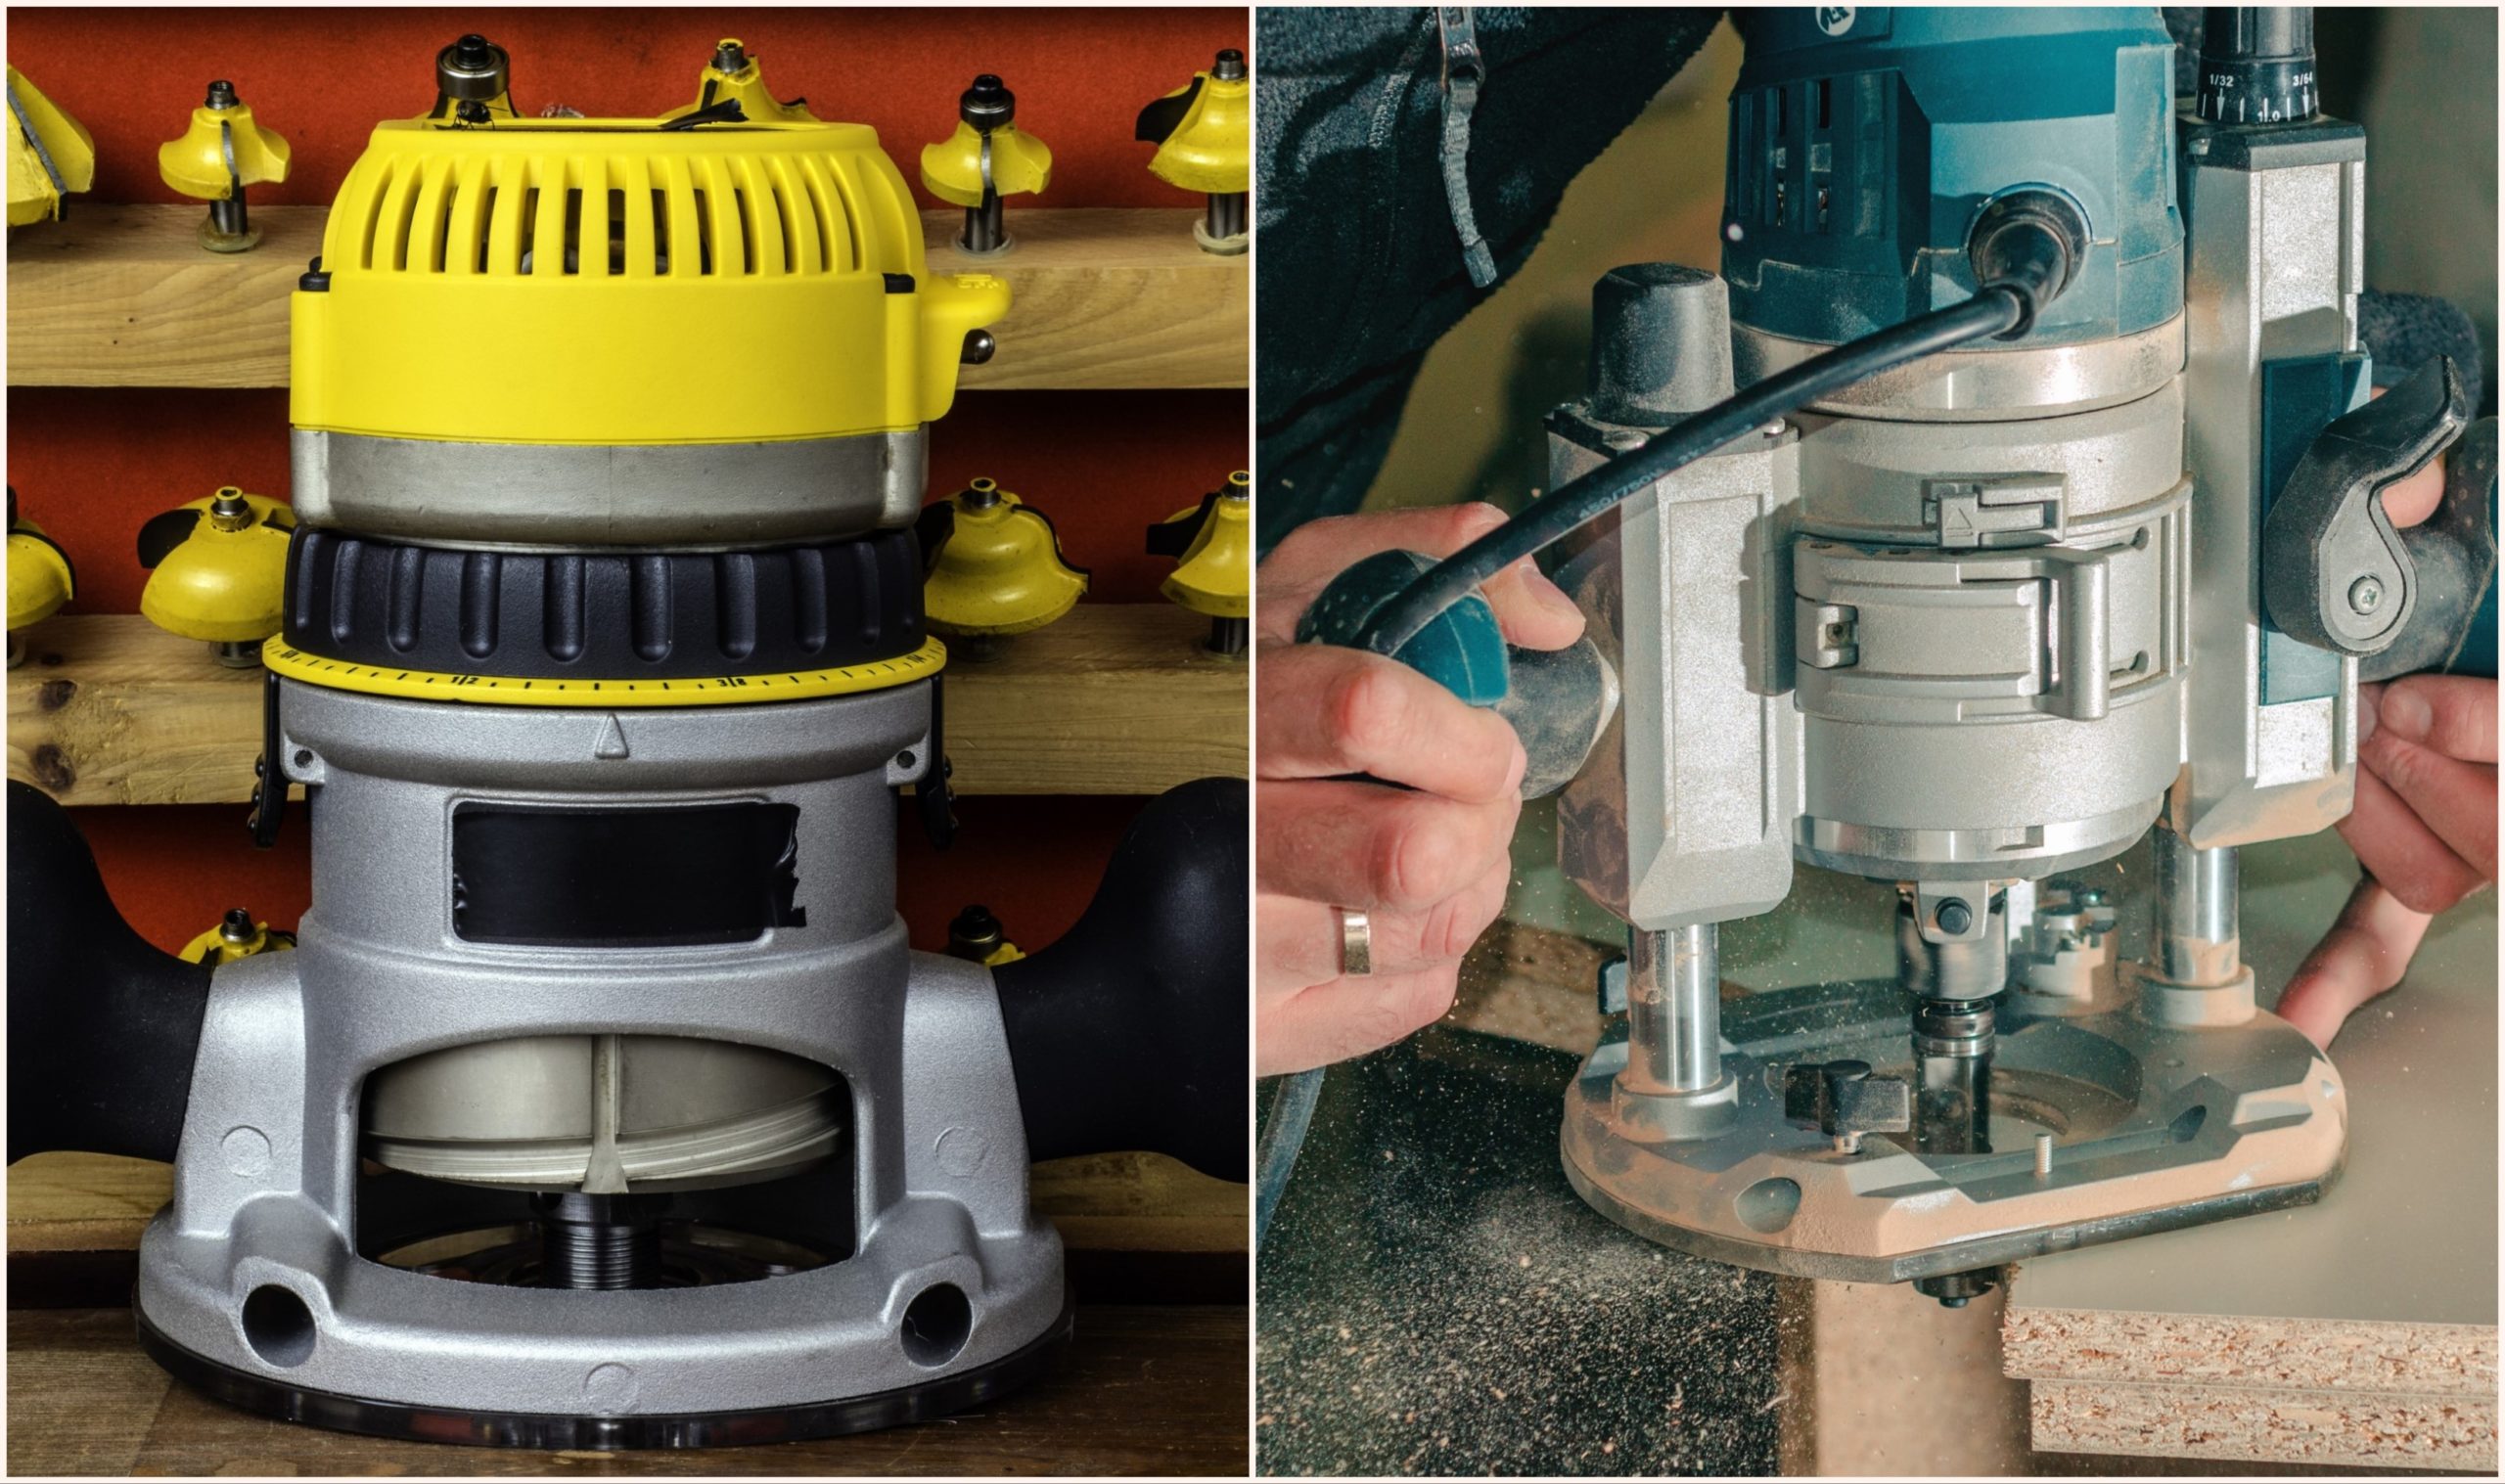 Plunge Router vs. Fixed Base Router